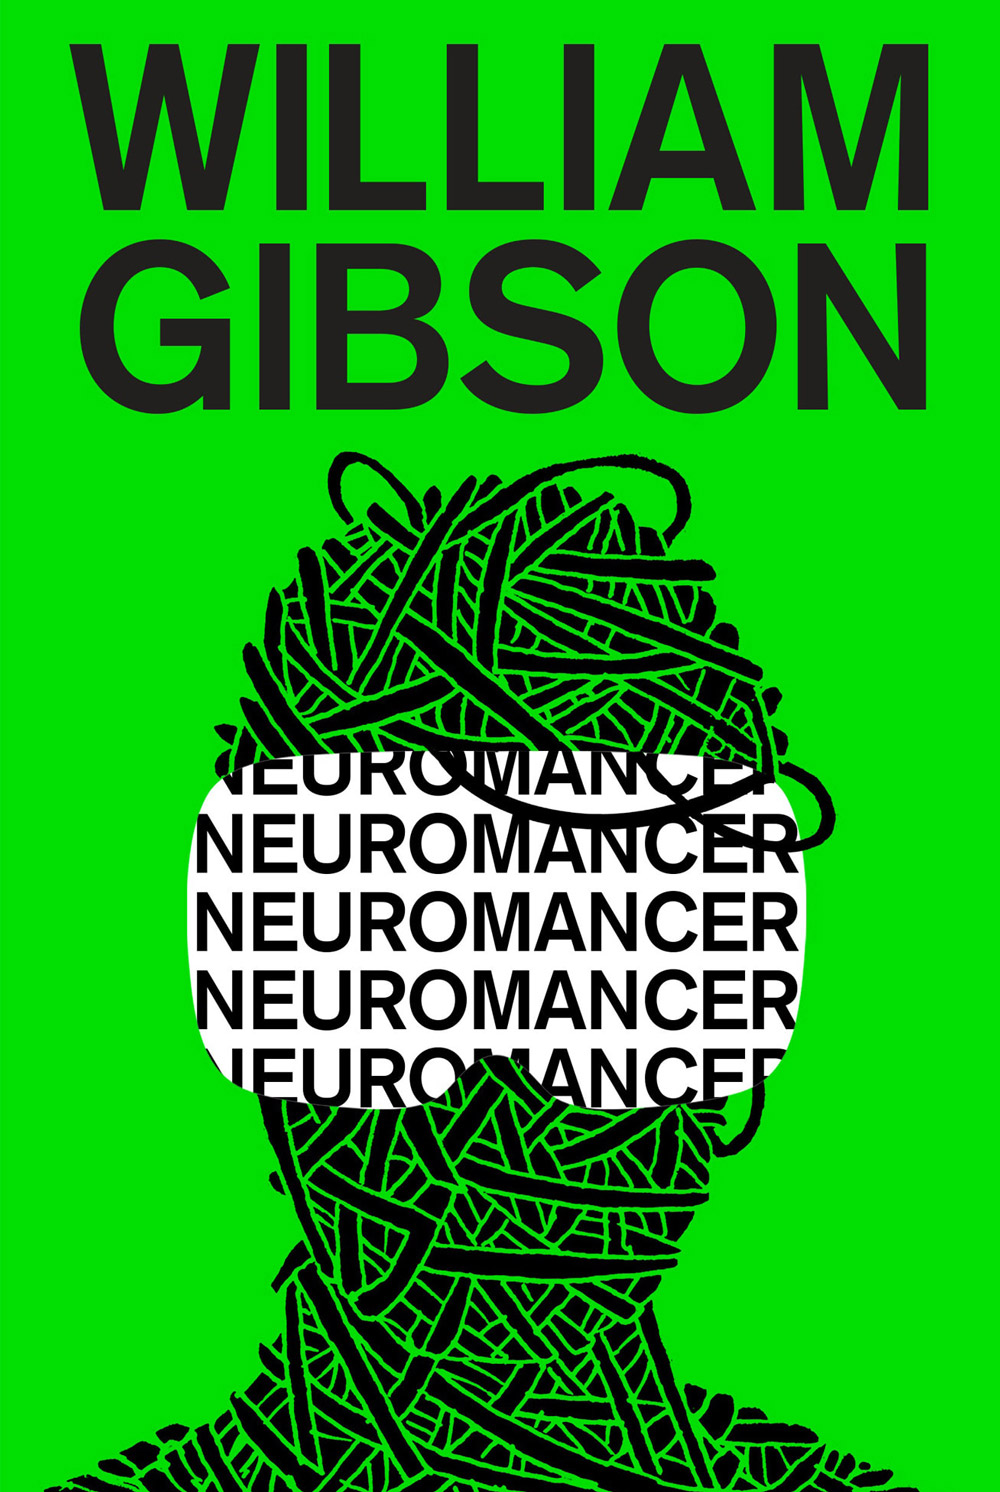 Apple TV+ announced today that it will expand its acclaimed slate of science fiction offerings with “Neuromancer,” a new 10-episode drama based on the award-winning novel of the same name by William Gibson.